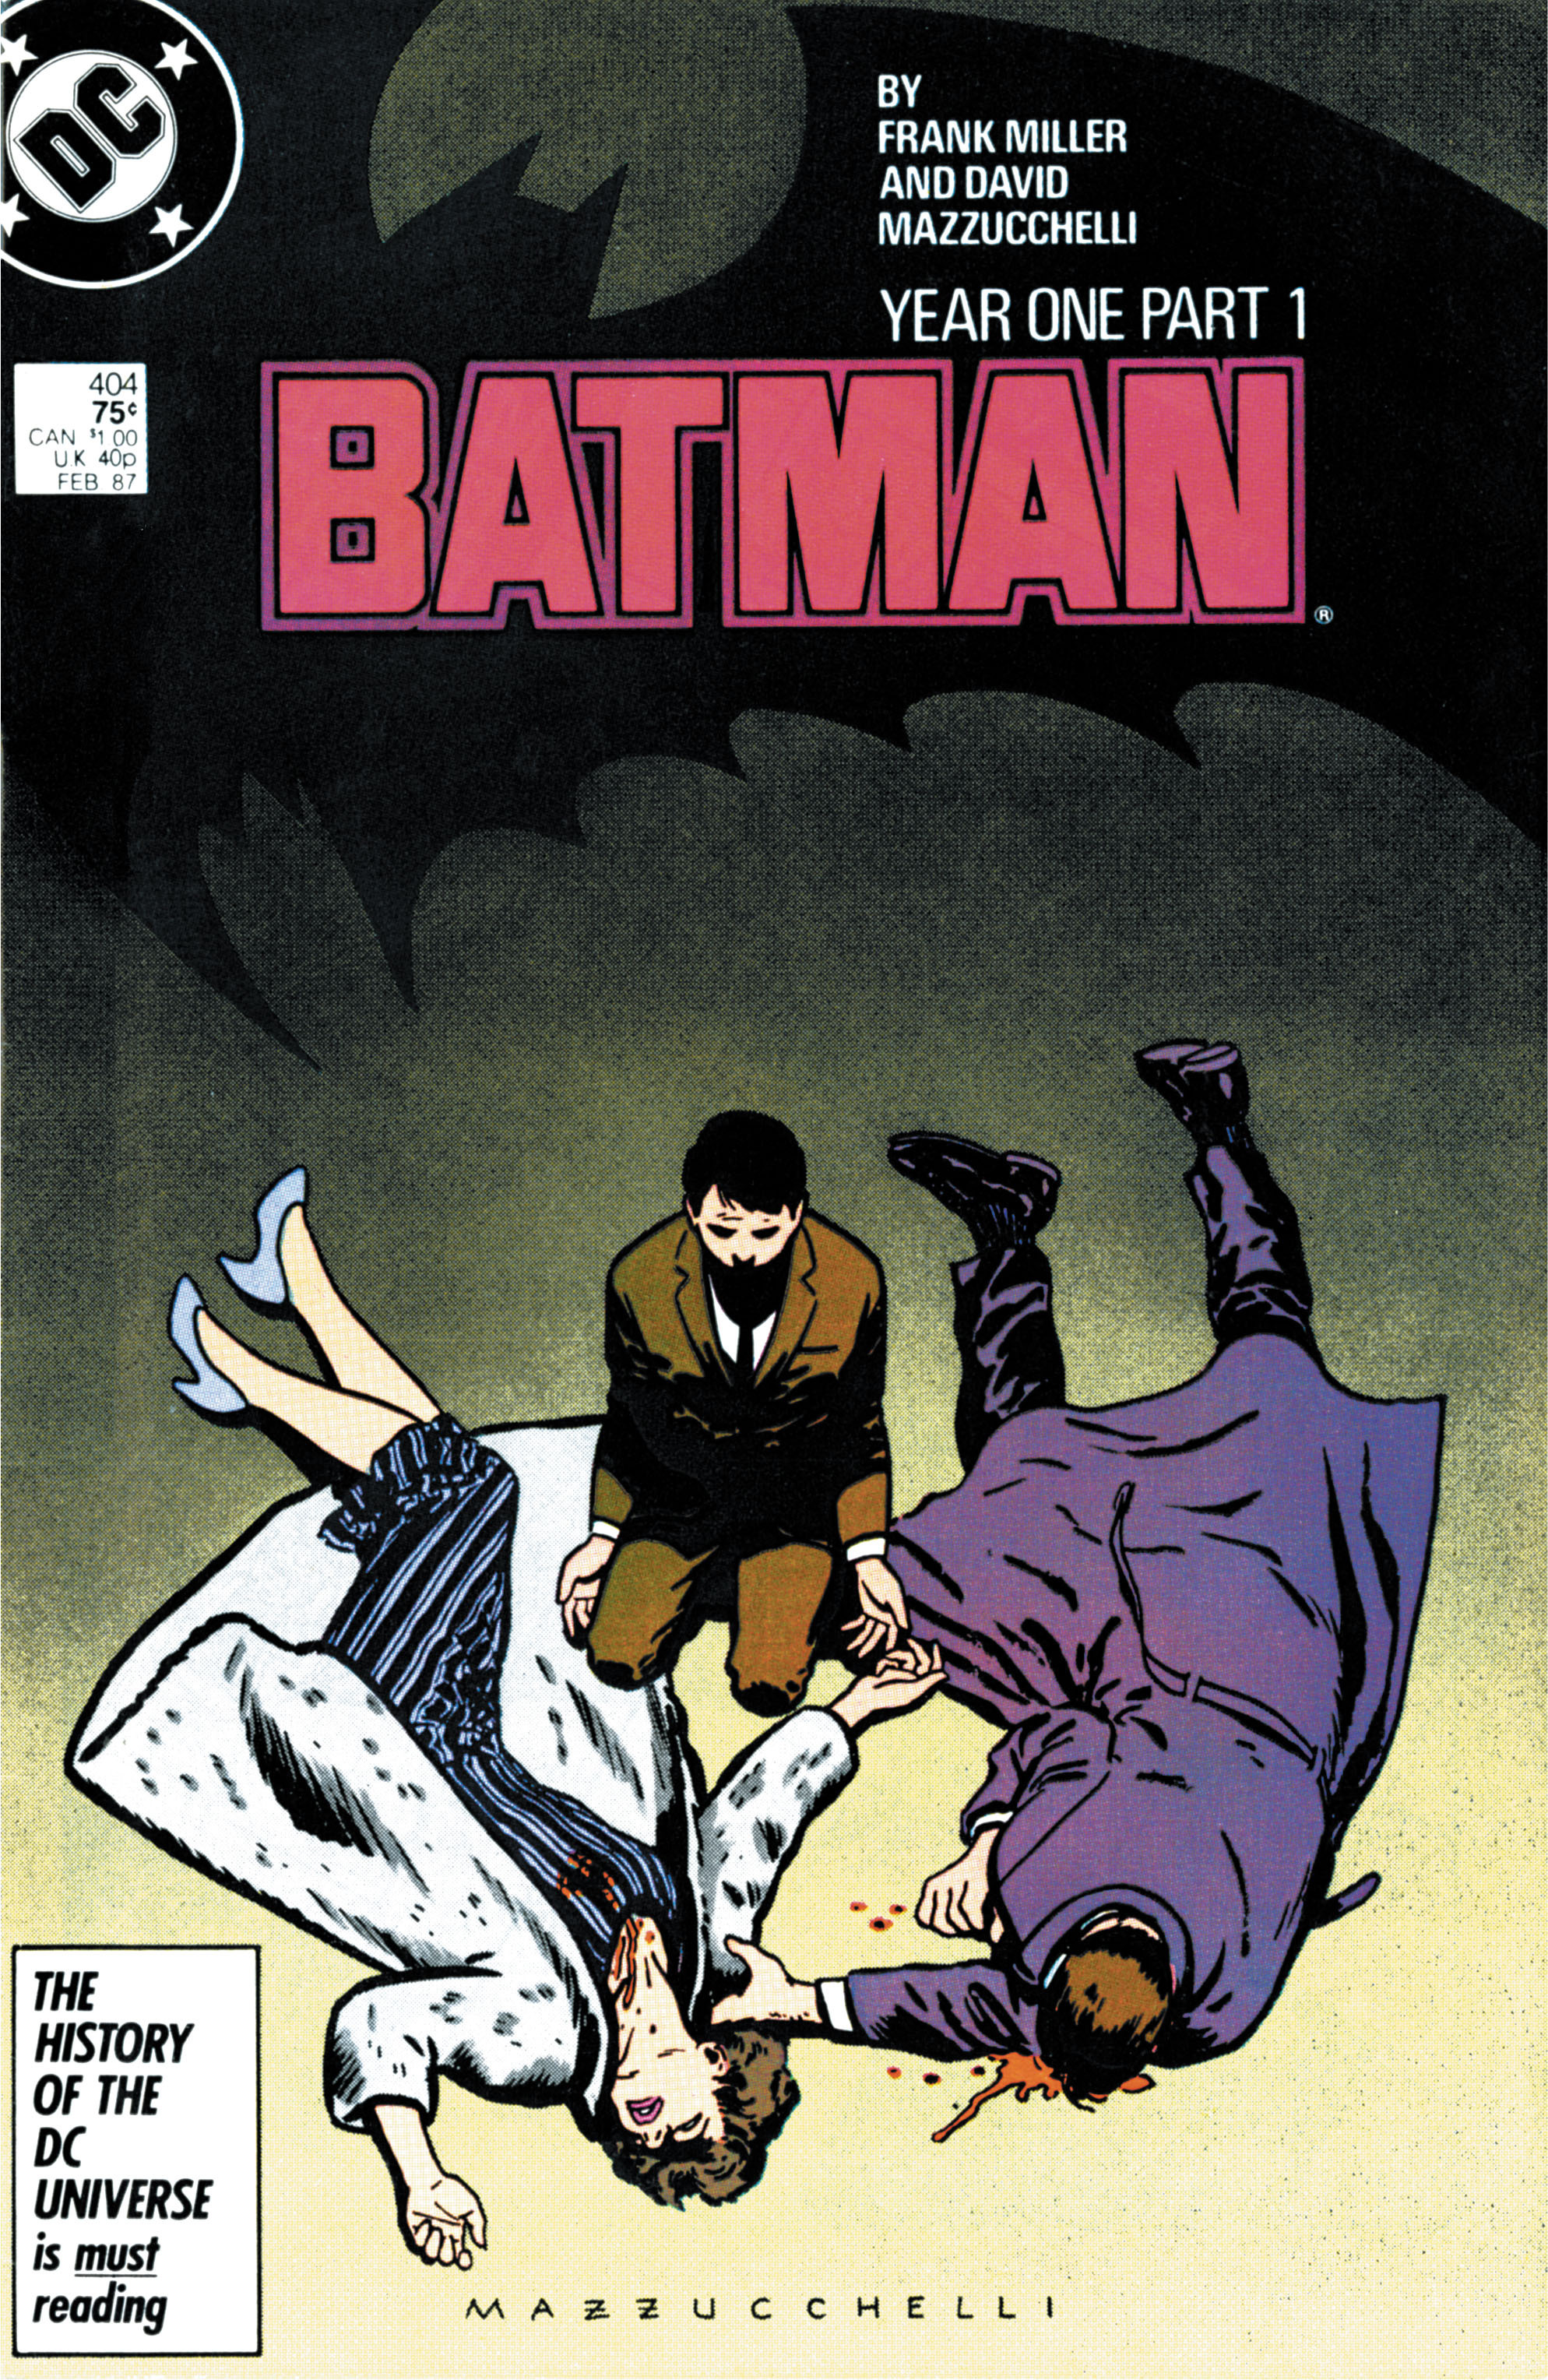 Batman 1940 Issue 404 | Read Batman 1940 Issue 404 comic online in high  quality. Read Full Comic online for free - Read comics online in high  quality .|